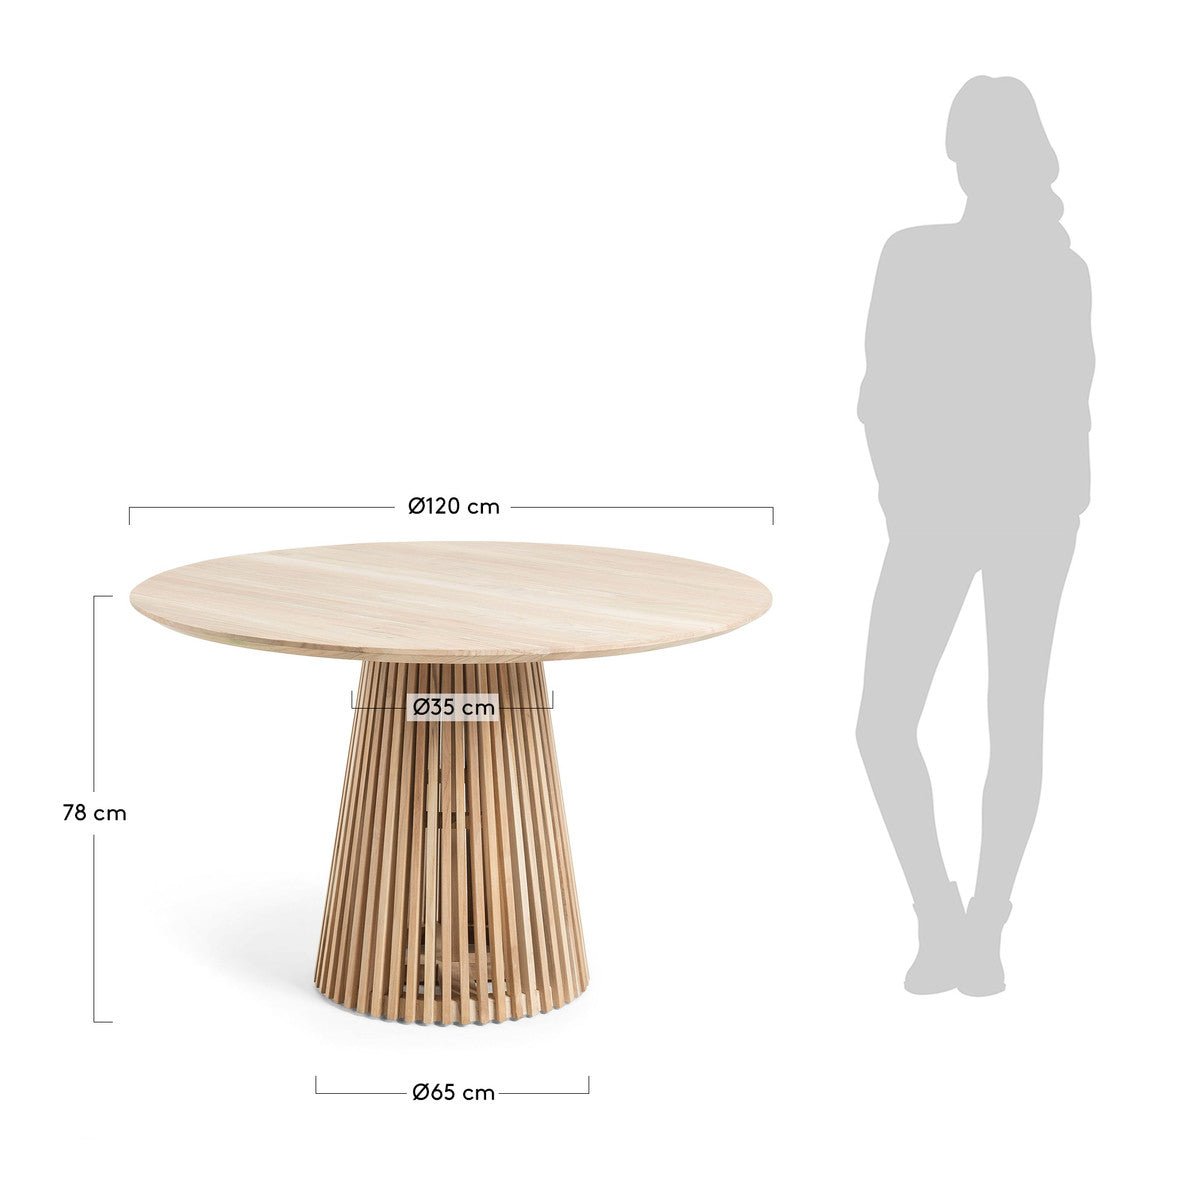 Rume Solid Timber Round Dining Table - Natural - Dining Tables